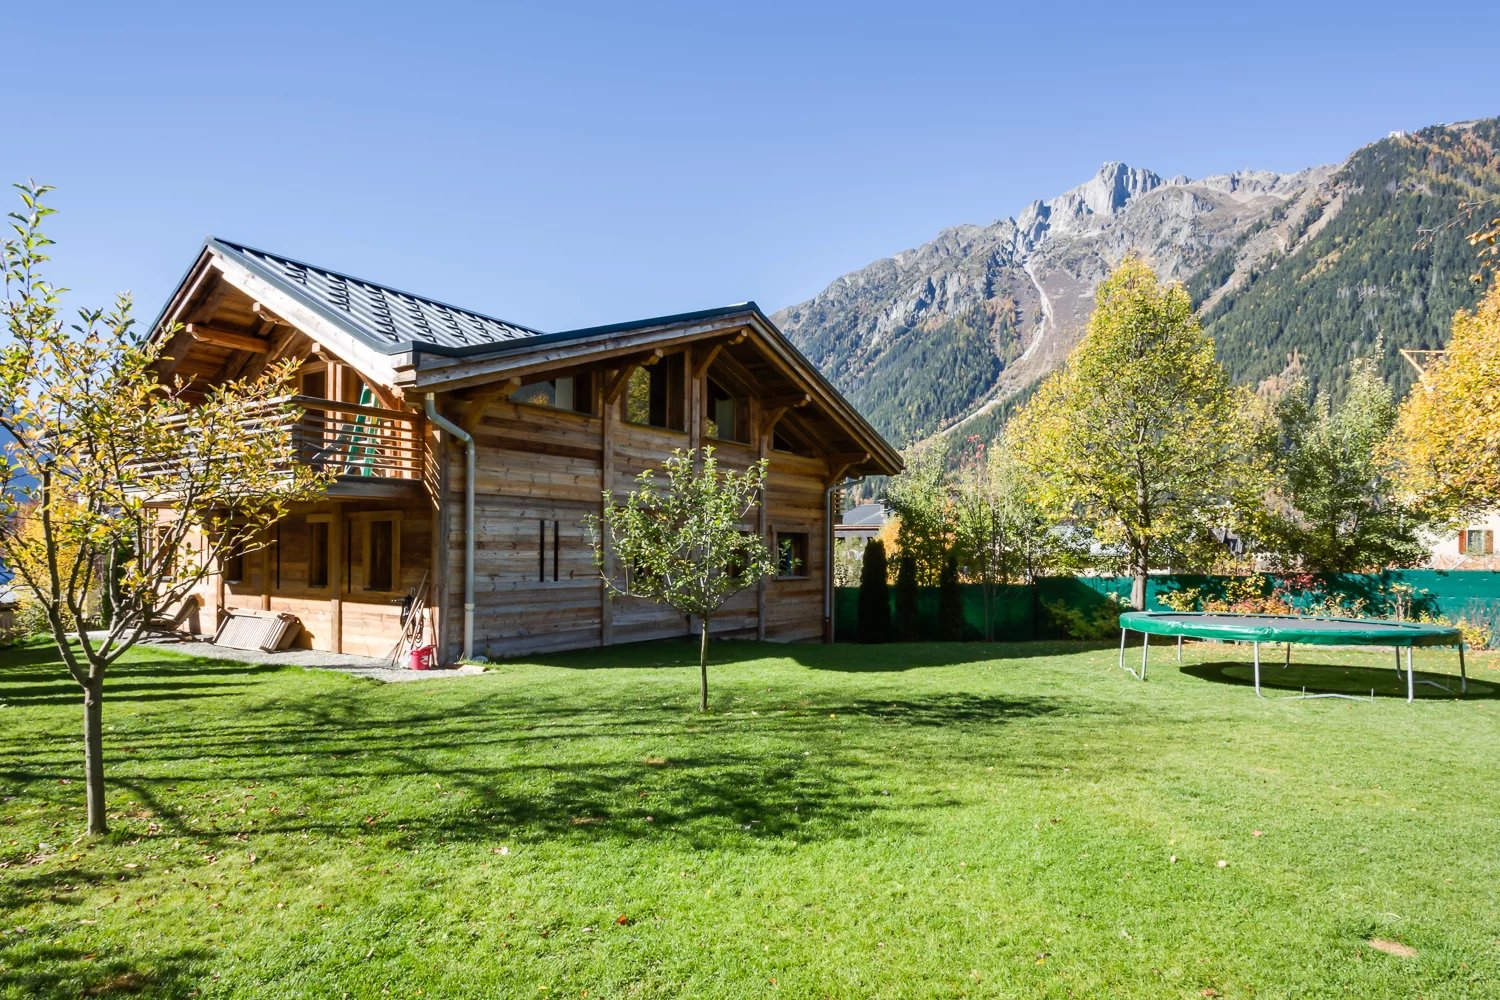 Magnificent 4-bedroom chalet with a modern, elegant design just 2 minutes from the town centre.